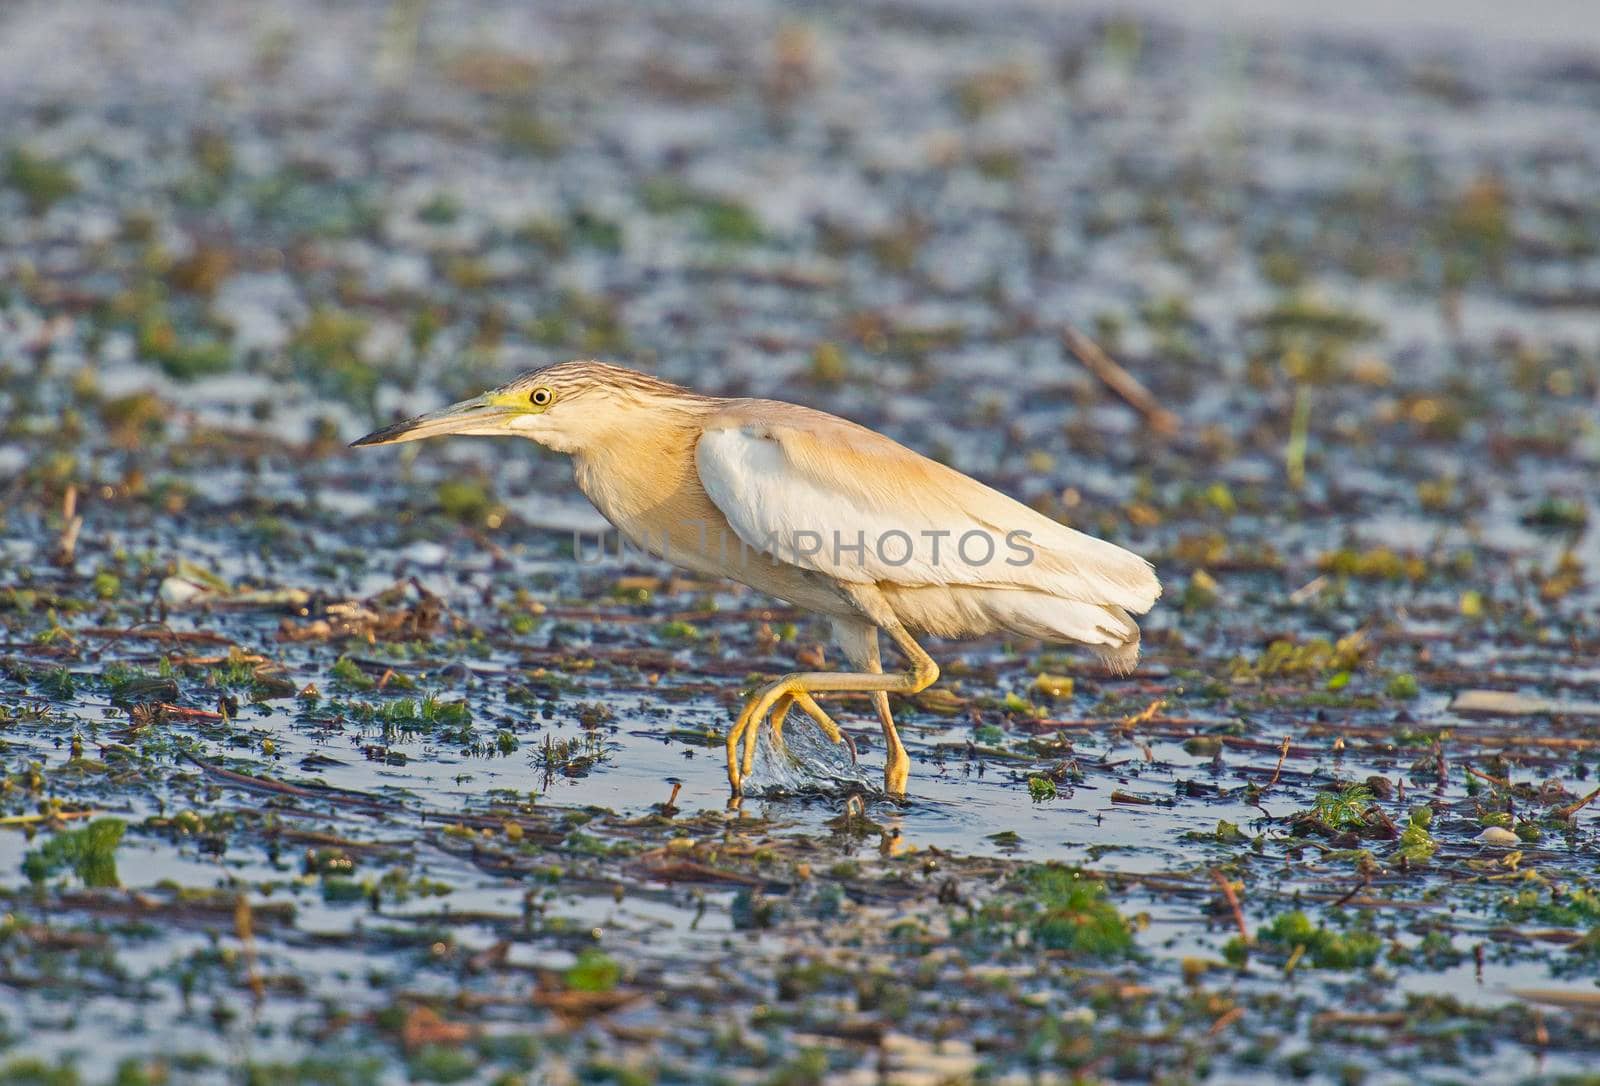 Squacco heron ardeola ralloides stood on edge of river bank wetlands in grass reeds